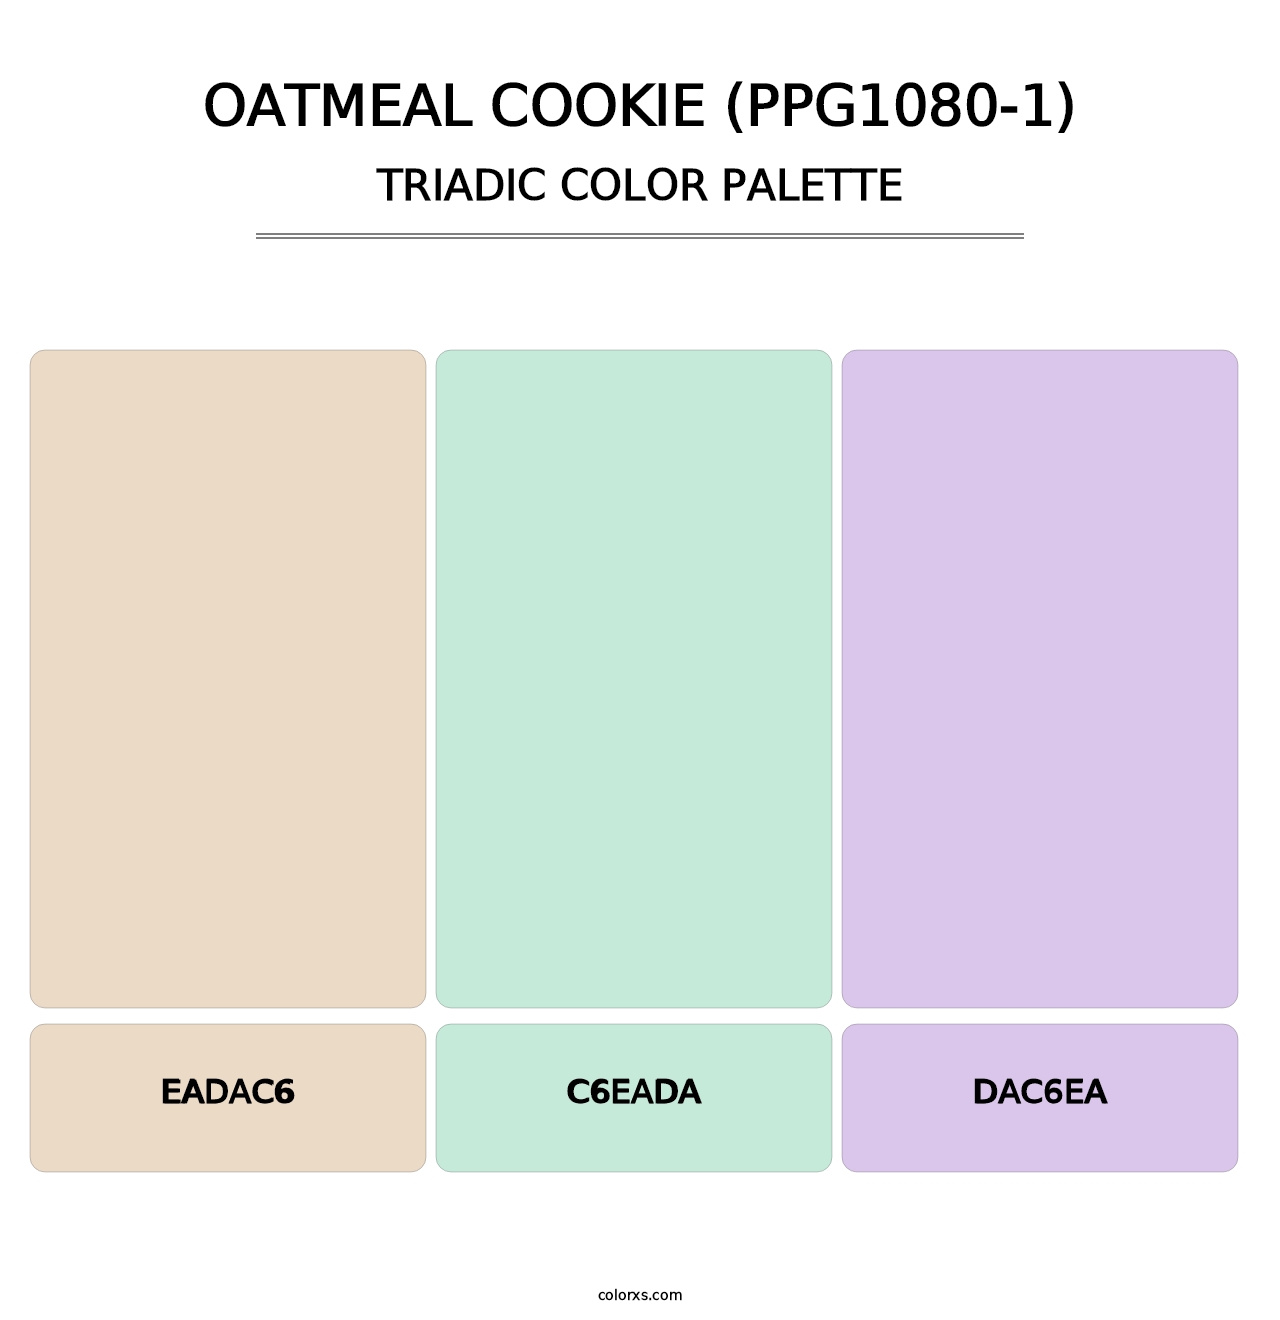 Oatmeal Cookie (PPG1080-1) - Triadic Color Palette